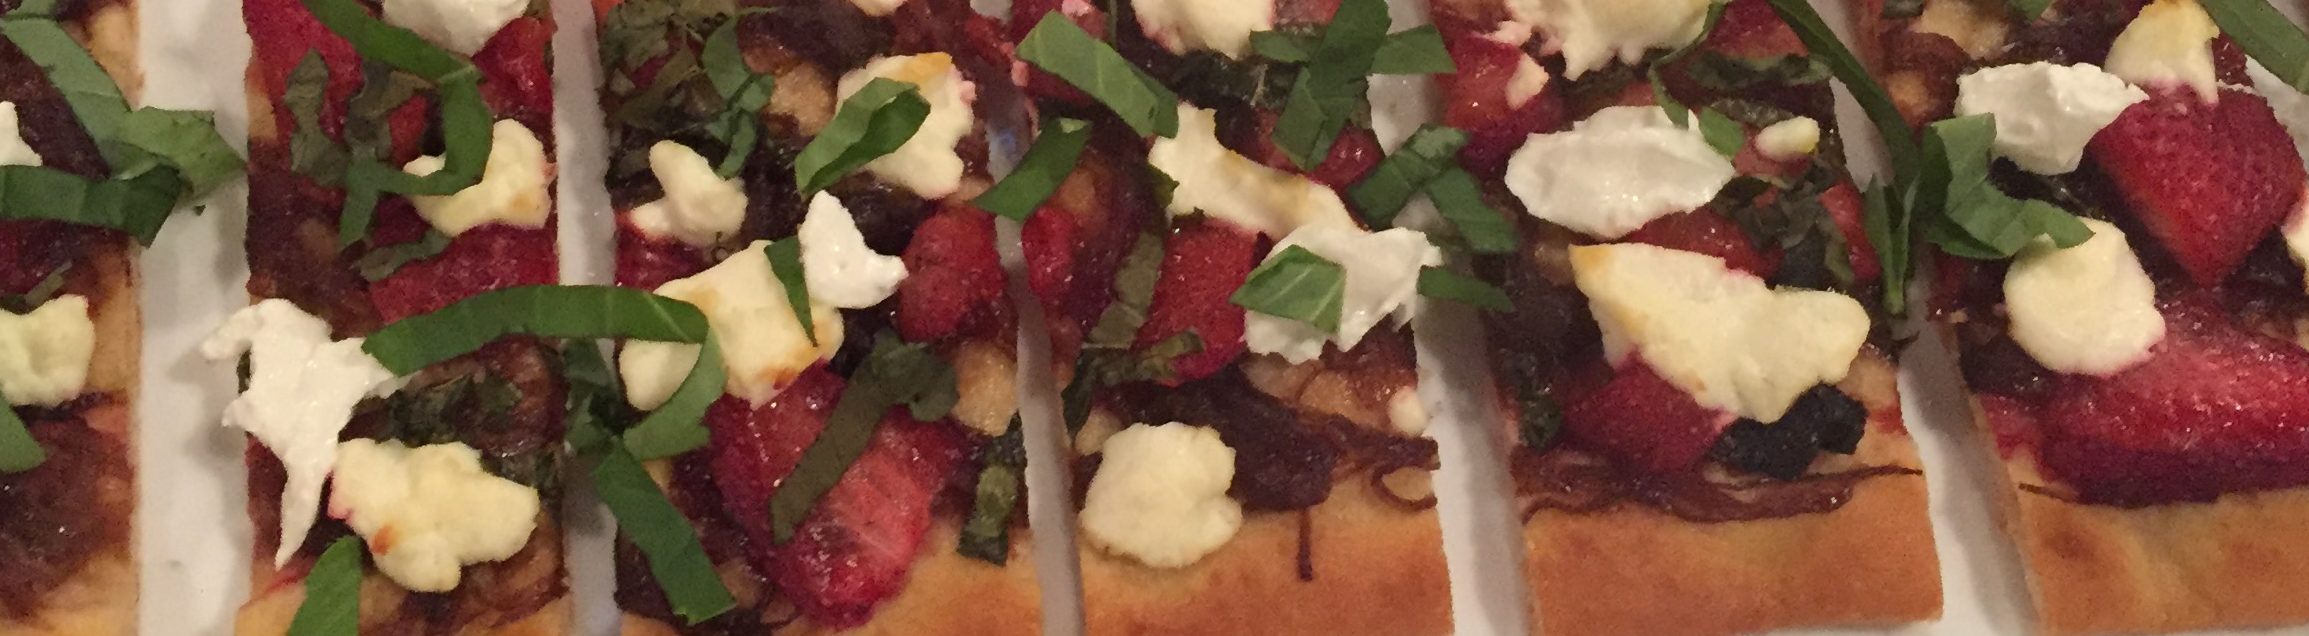 Strawberry, Goat Cheese, and Maple Balsamic Onion Flatbread